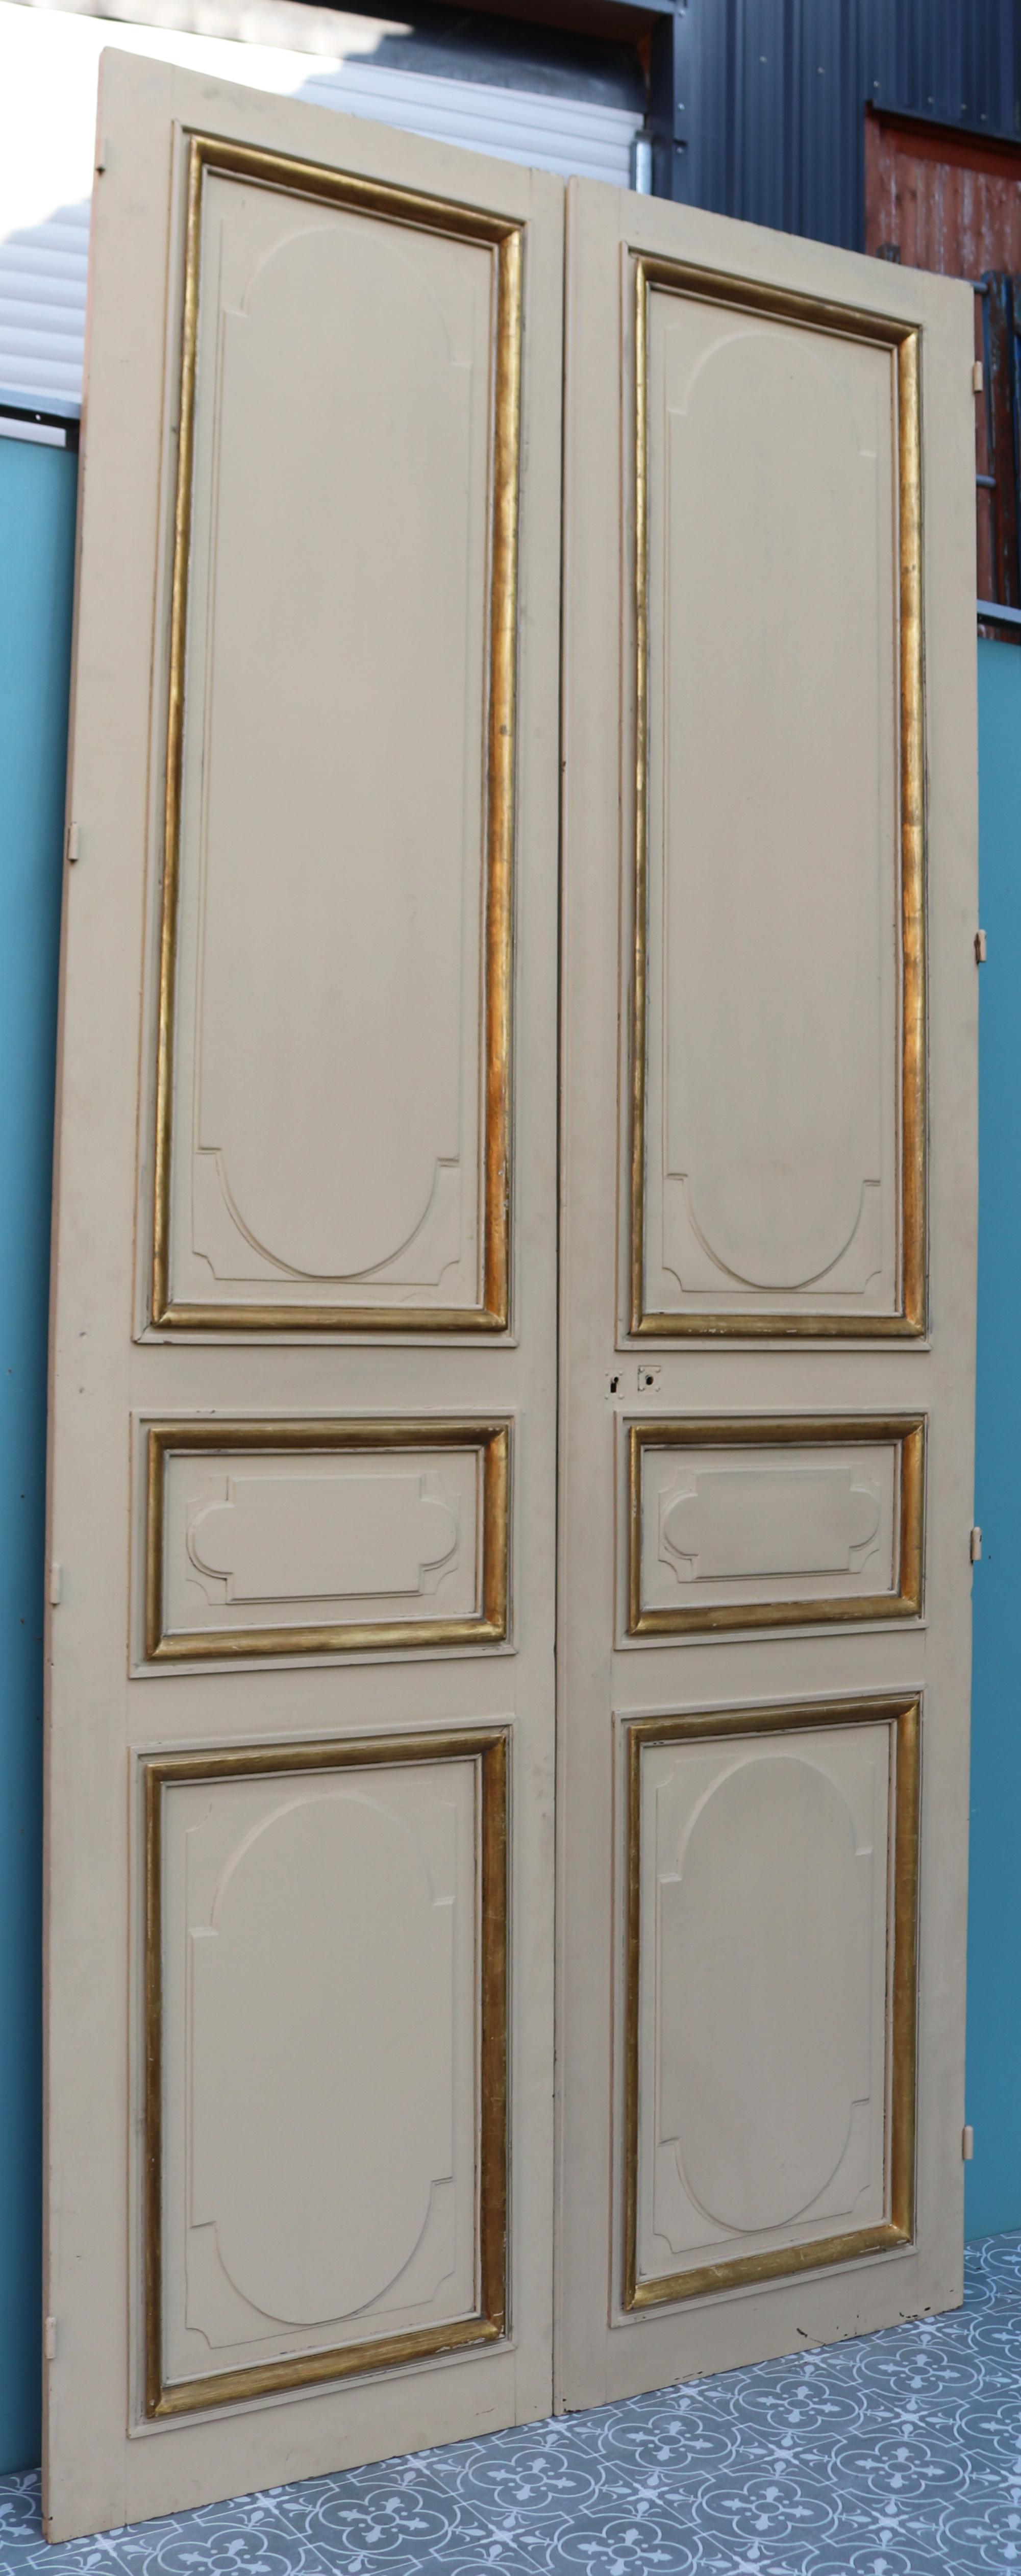 A set of pine doors painted in a mushroom colour with guiled moldings. These doors were reclaimed from a Gallery in Surrey.